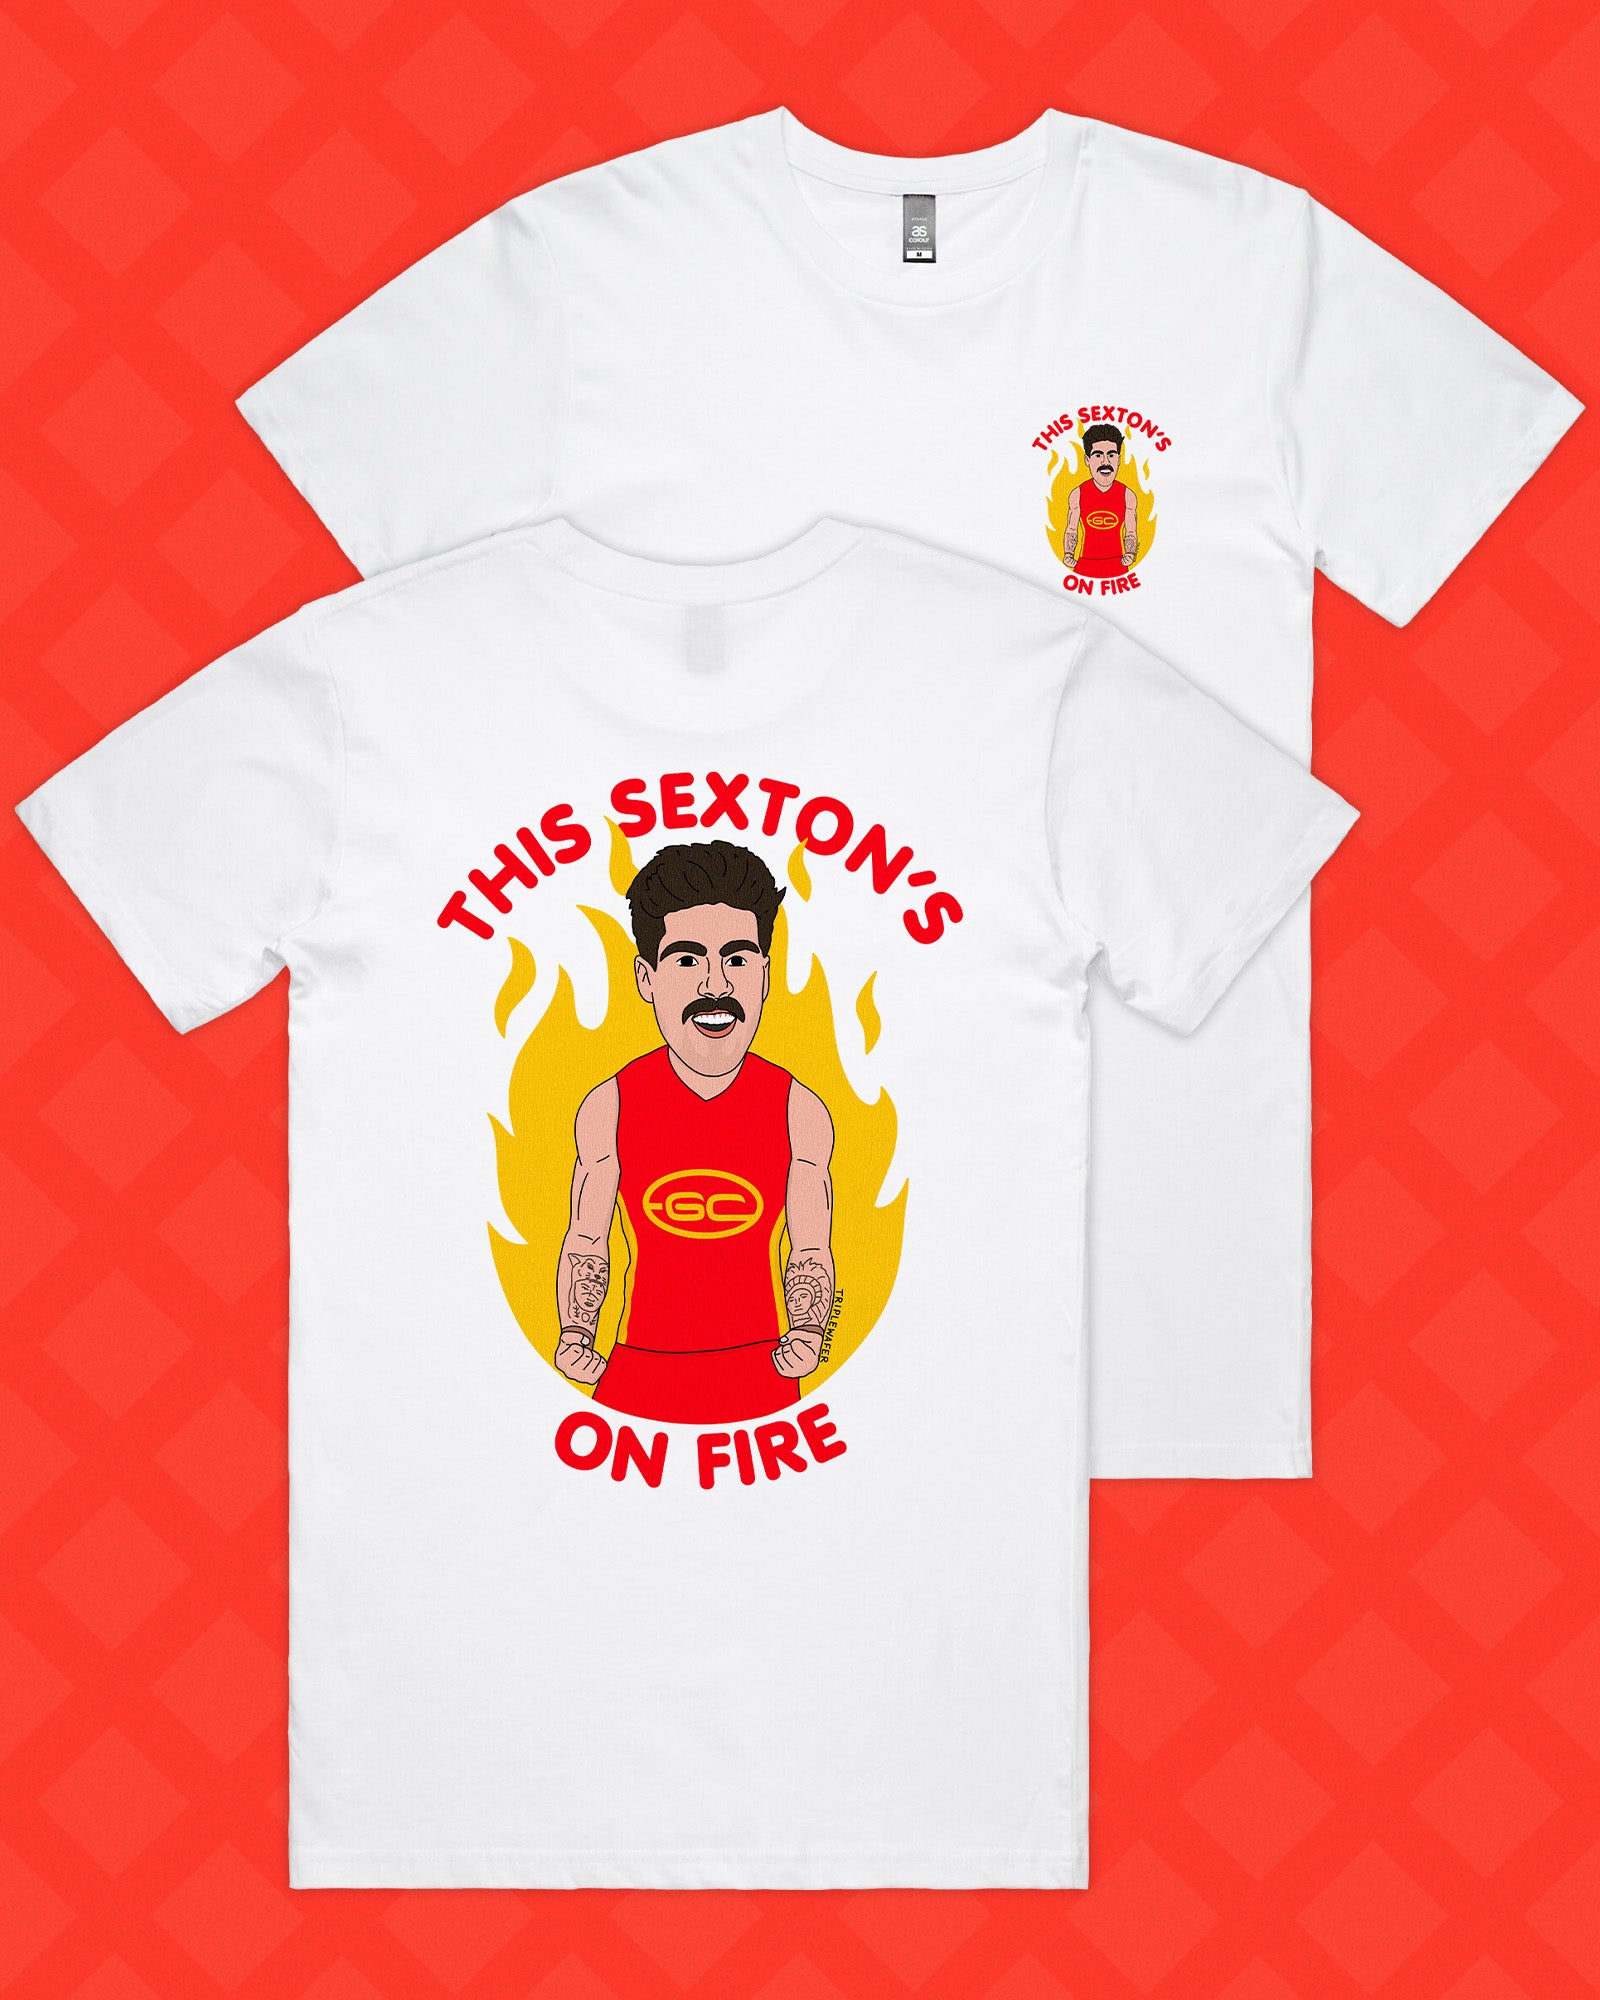 THIS SEXTON'S ON FIRE TEE